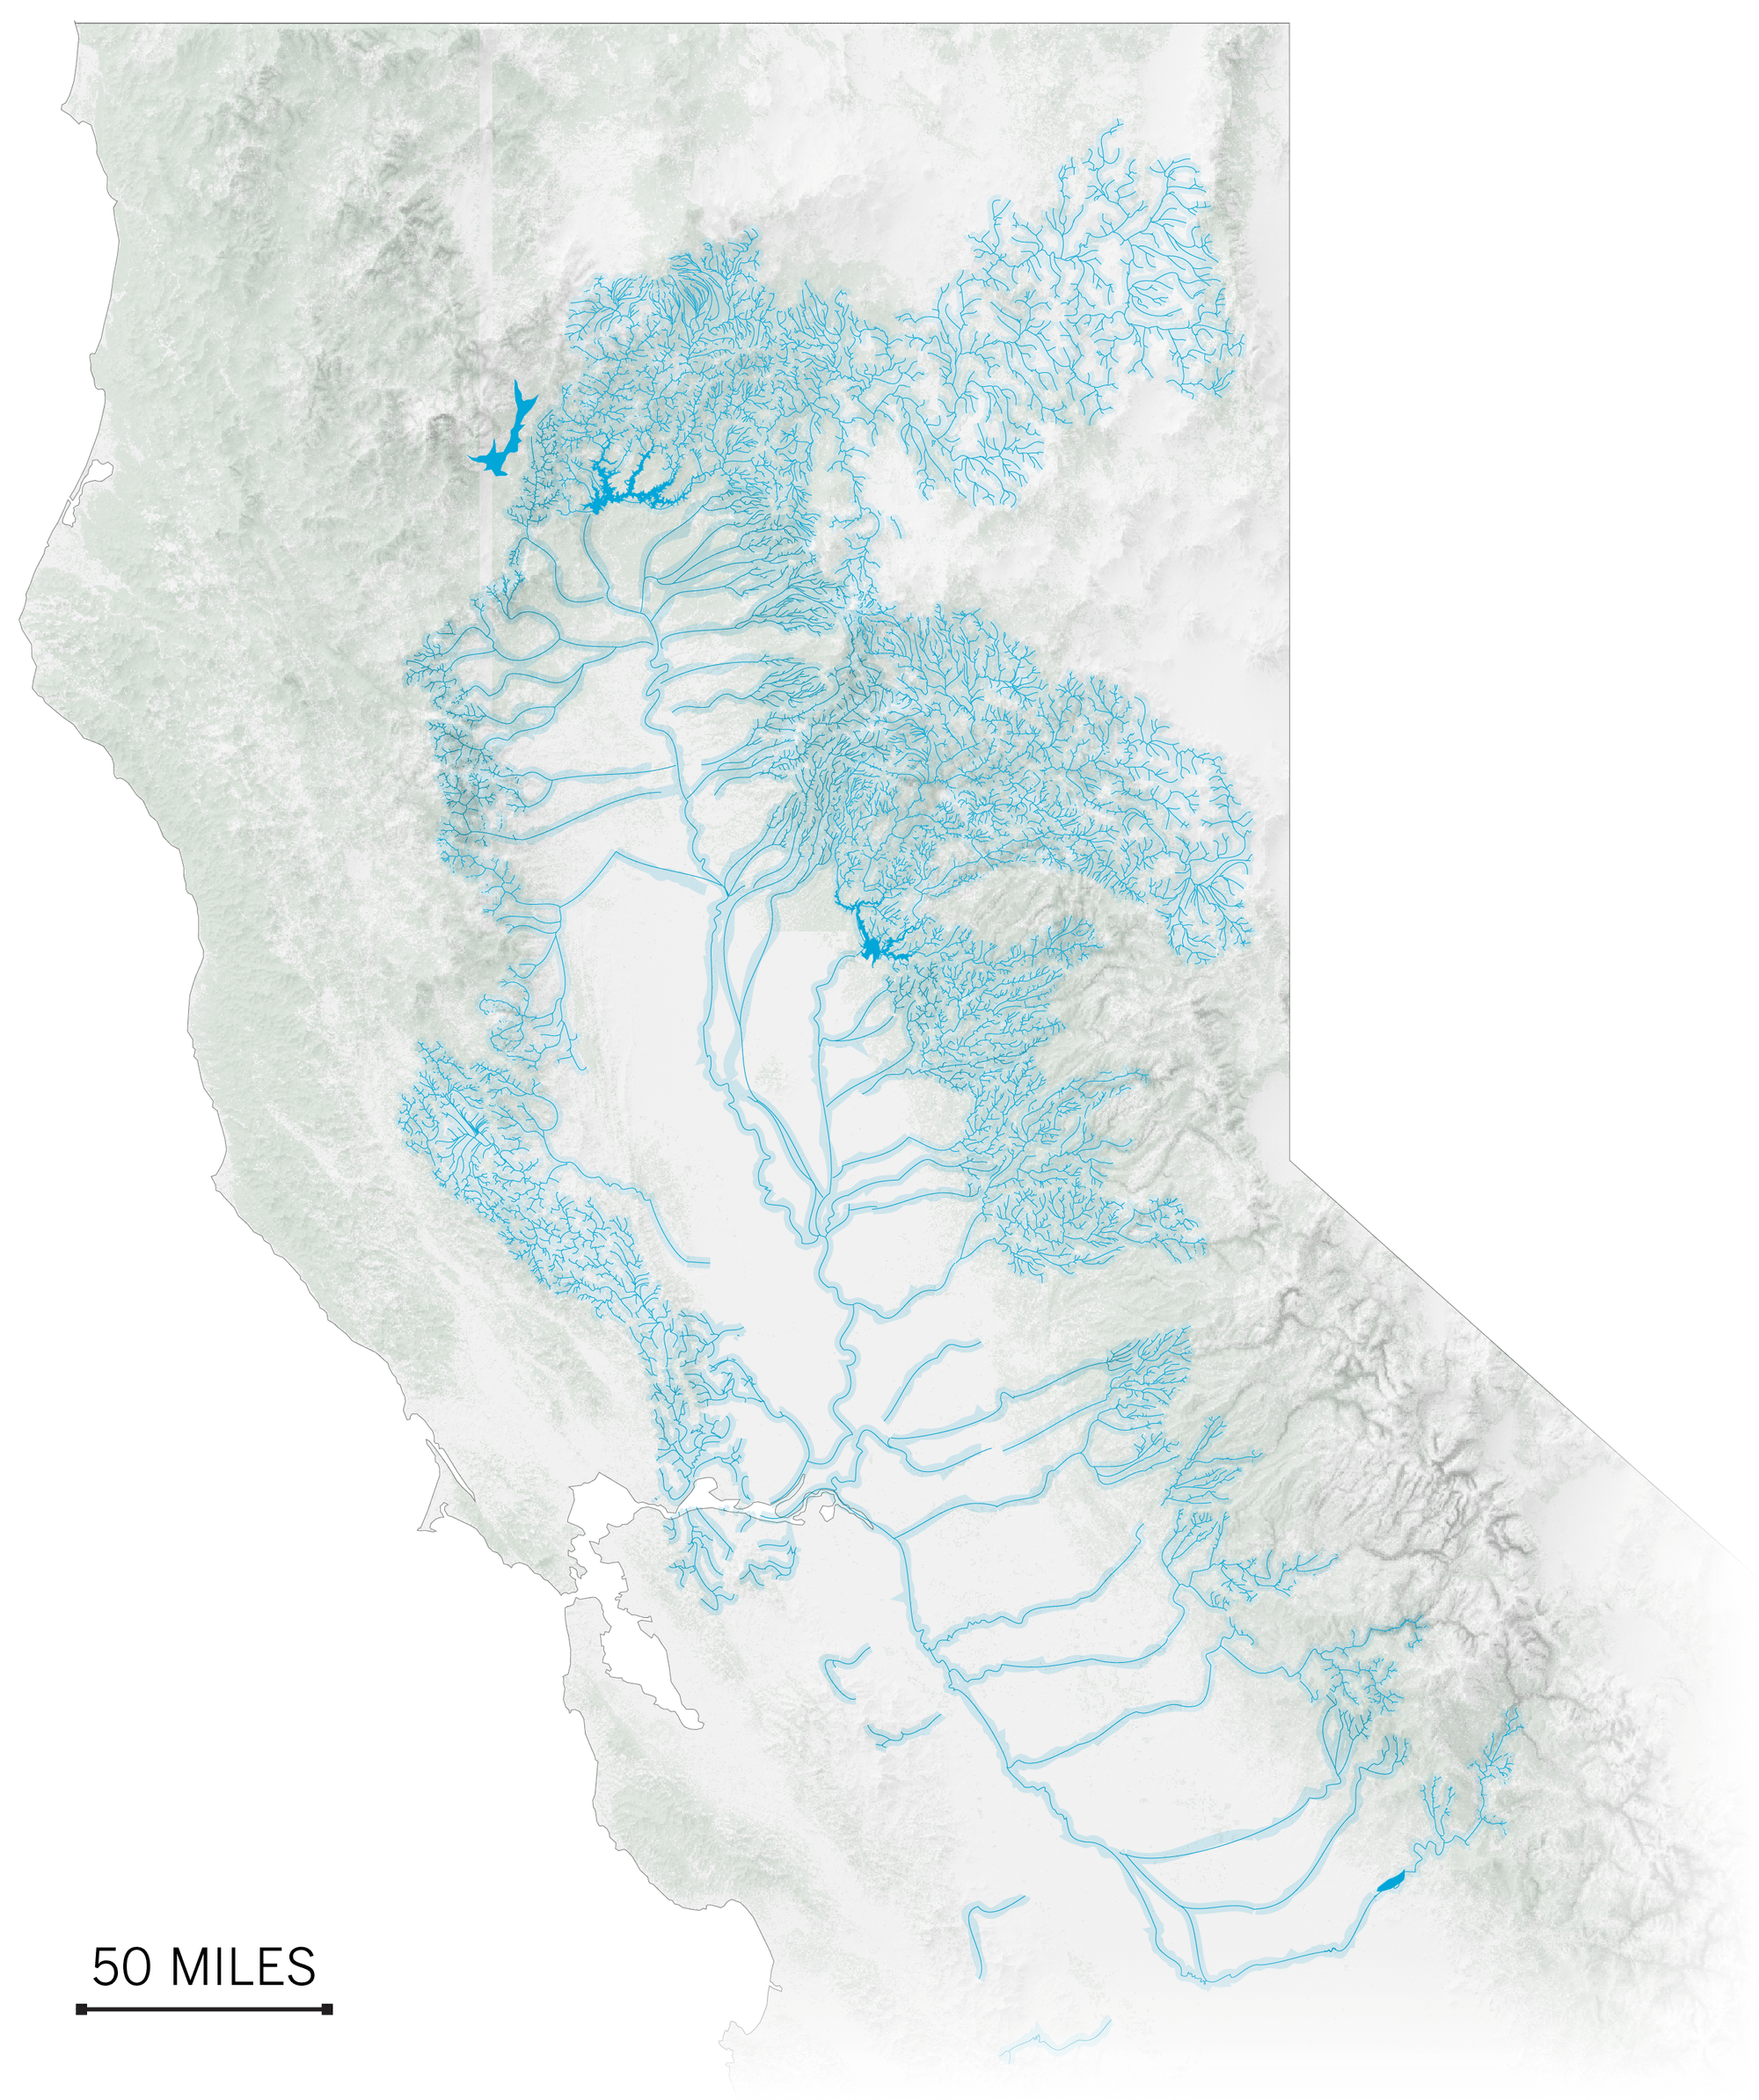 A map showing all historical salmon rivers in Central Valley.